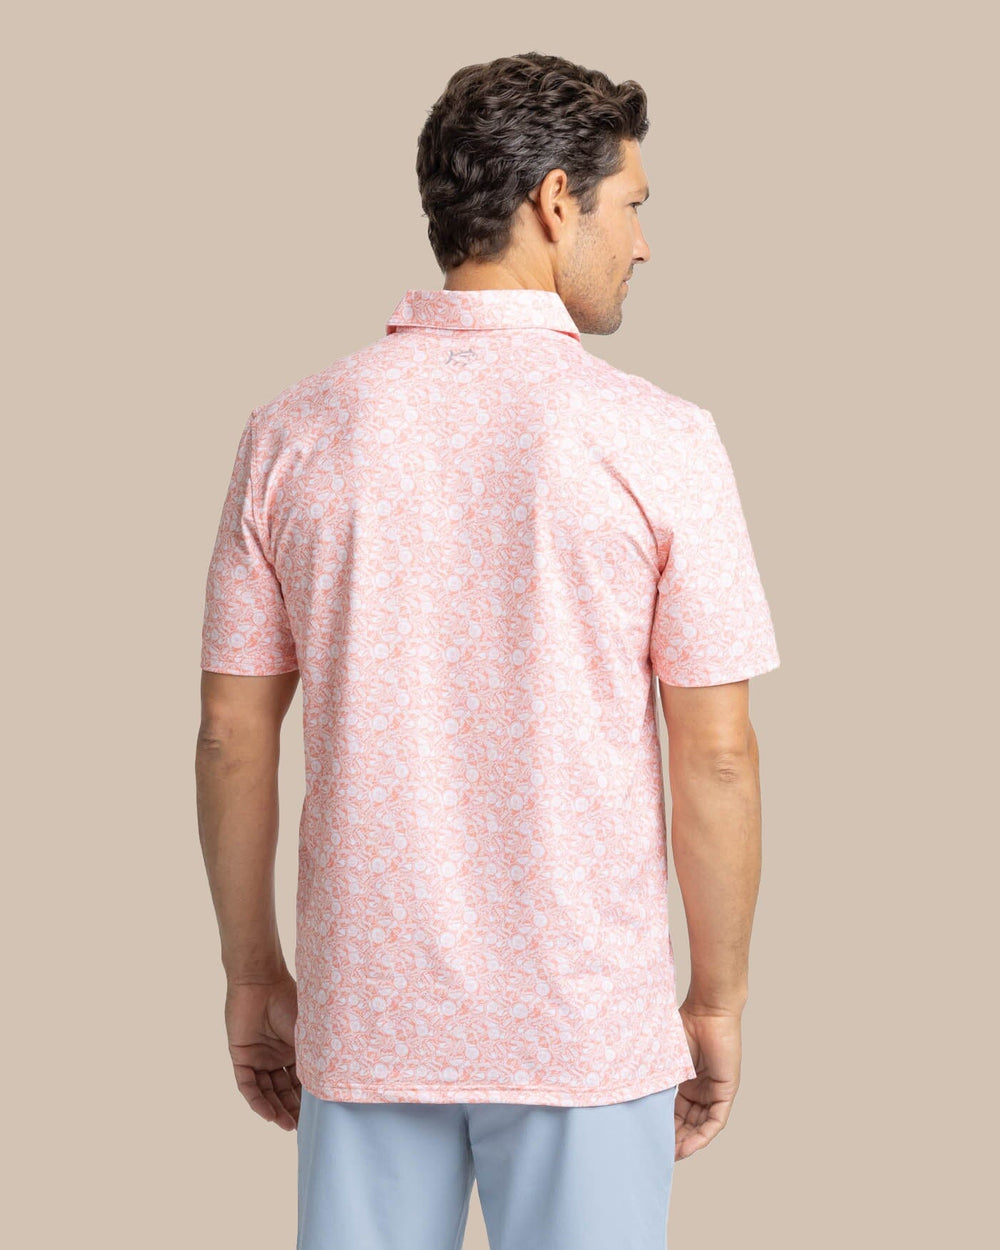 The back view of the Southern Tide Driver Caps Off Printed Polo by Southern Tide - Desert Flower Coral